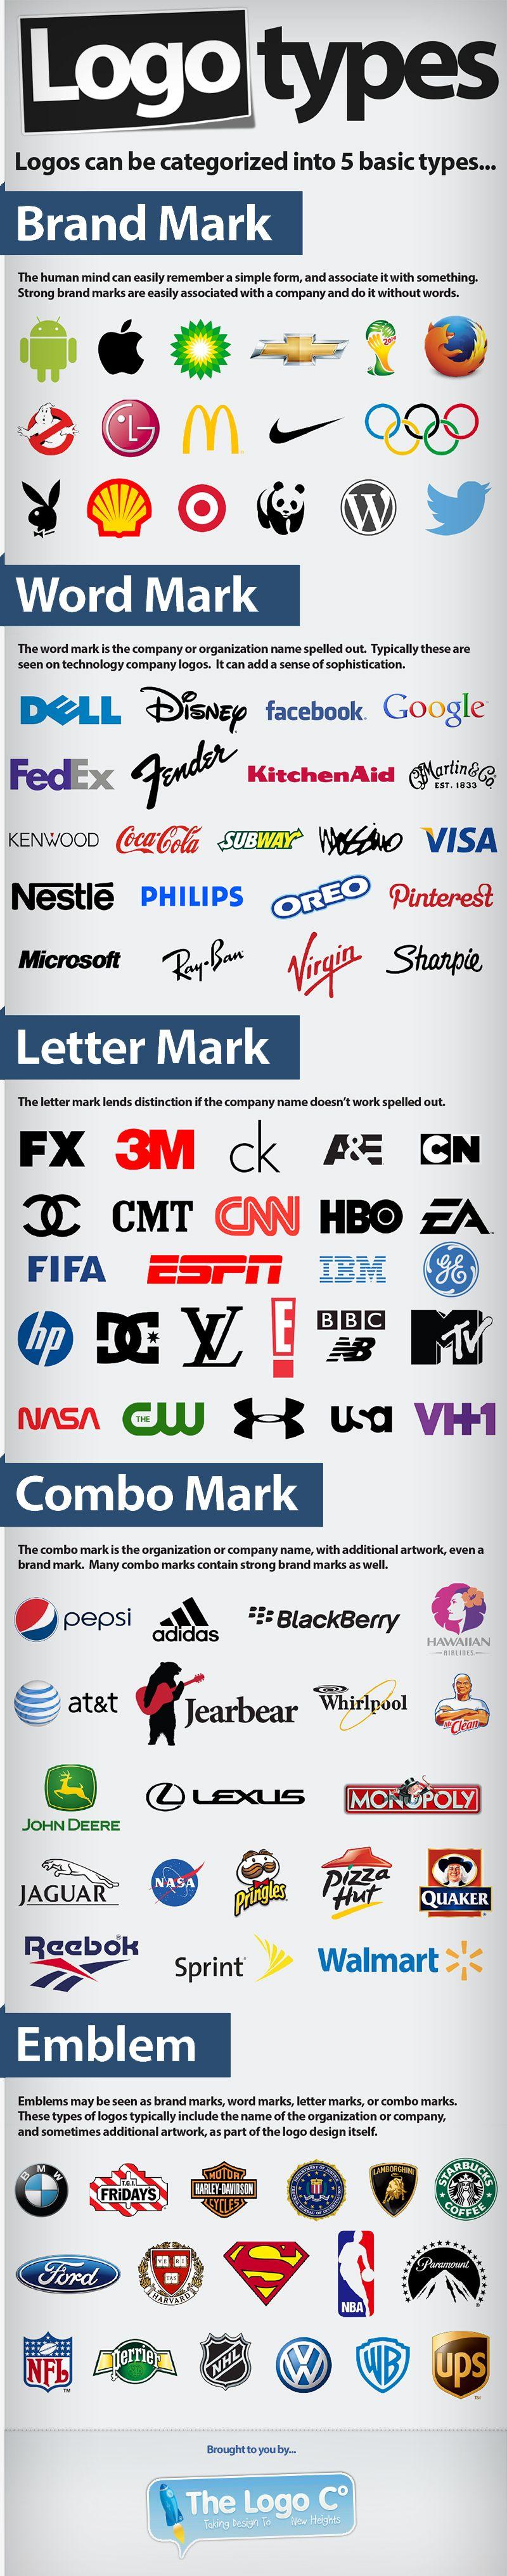 Word Famous Logo - Infographic: The Psychology Behind Logo and Color Choice